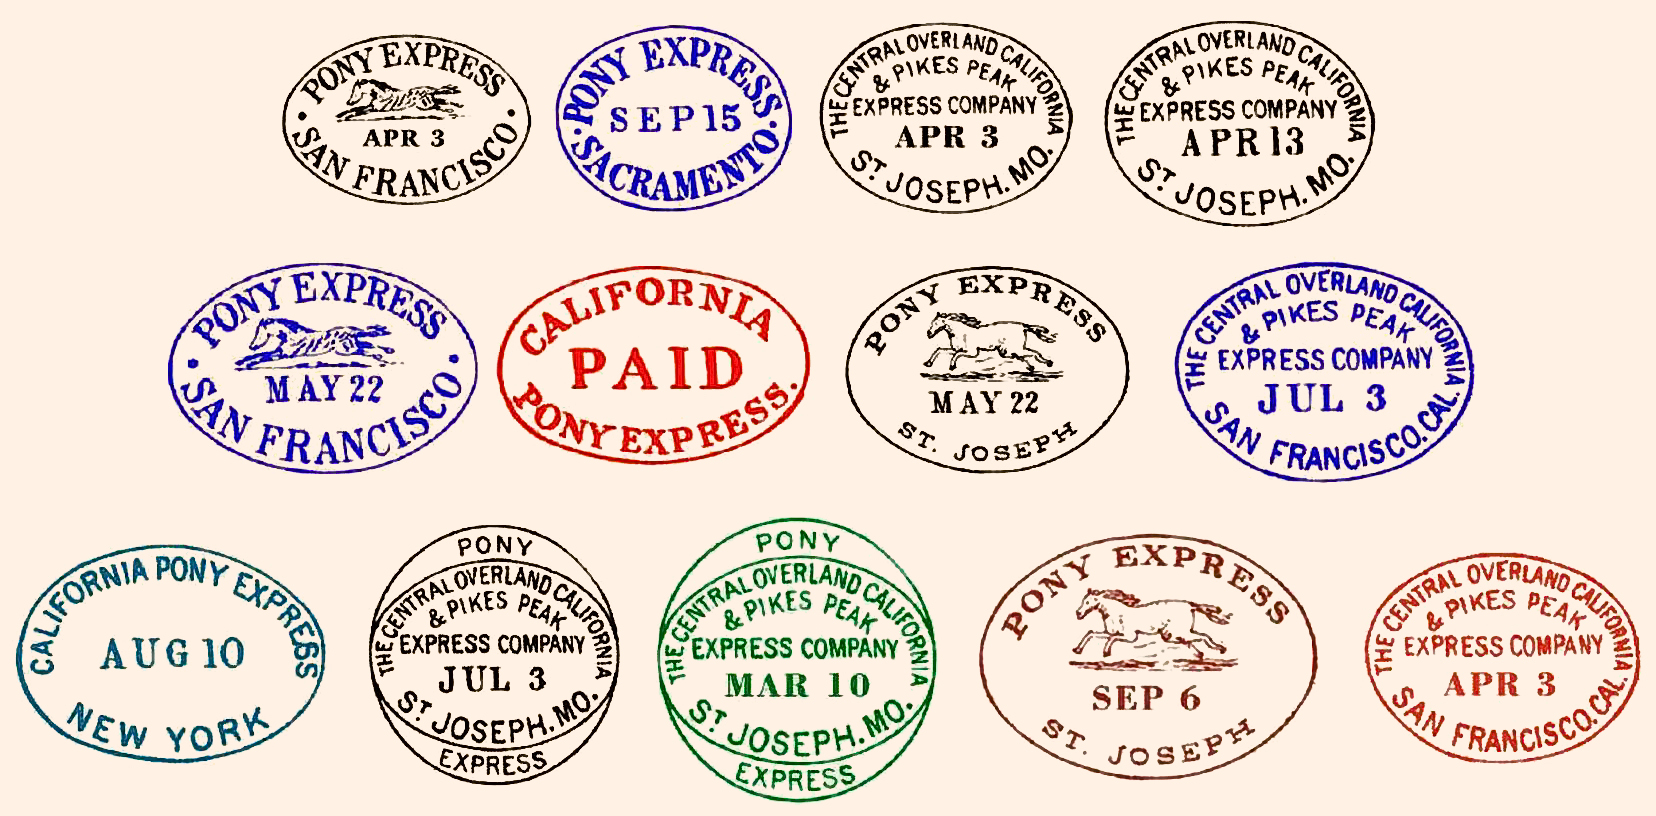 Examples of postmarks applied to mail transported by the Pony Express.